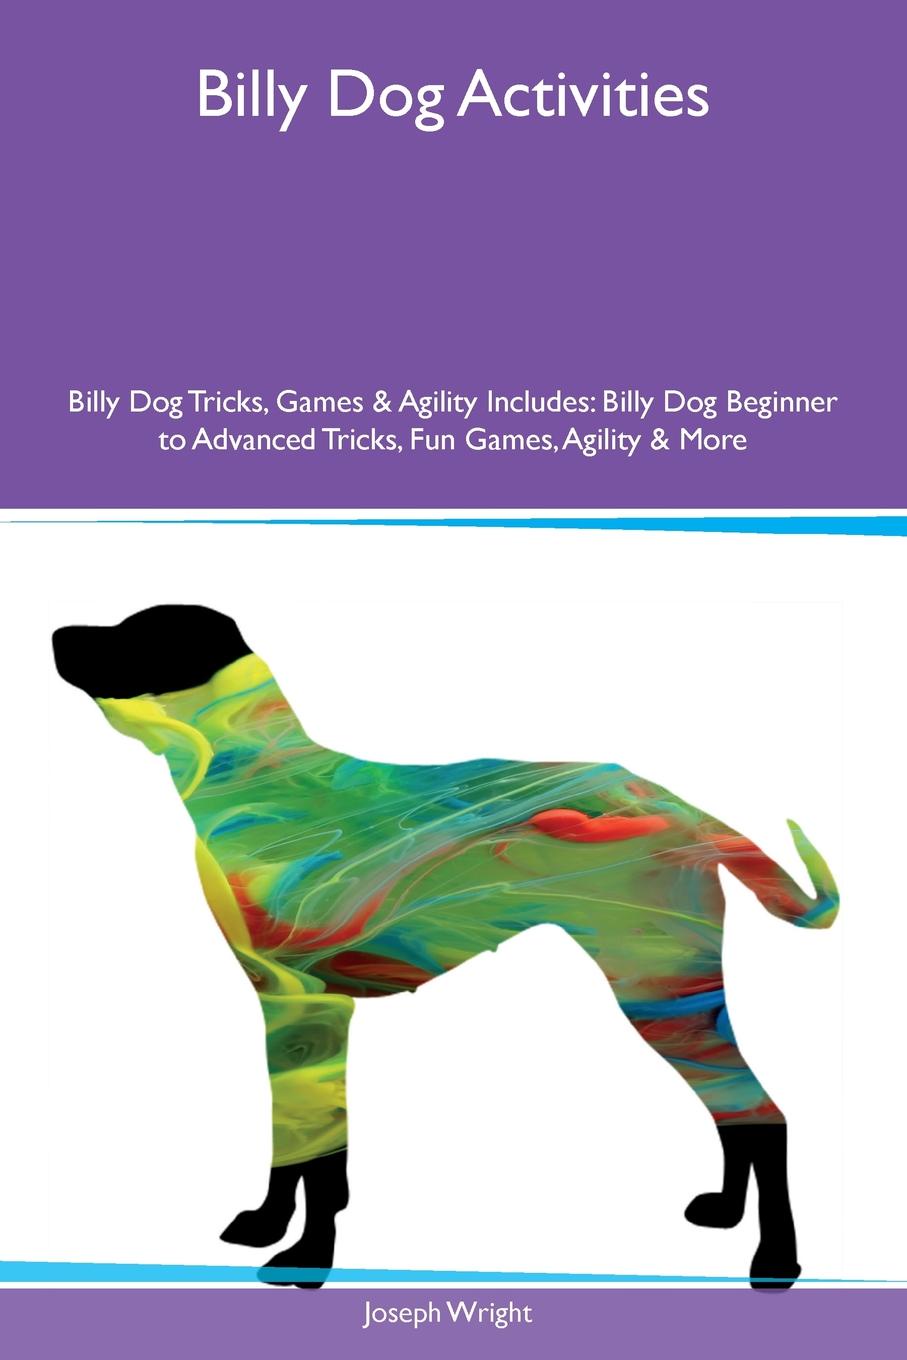 Billy Dog Activities Billy Dog Tricks, Games & Agility Includes. Billy Dog Beginner to Advanced Tricks, Fun Games, Agility & More